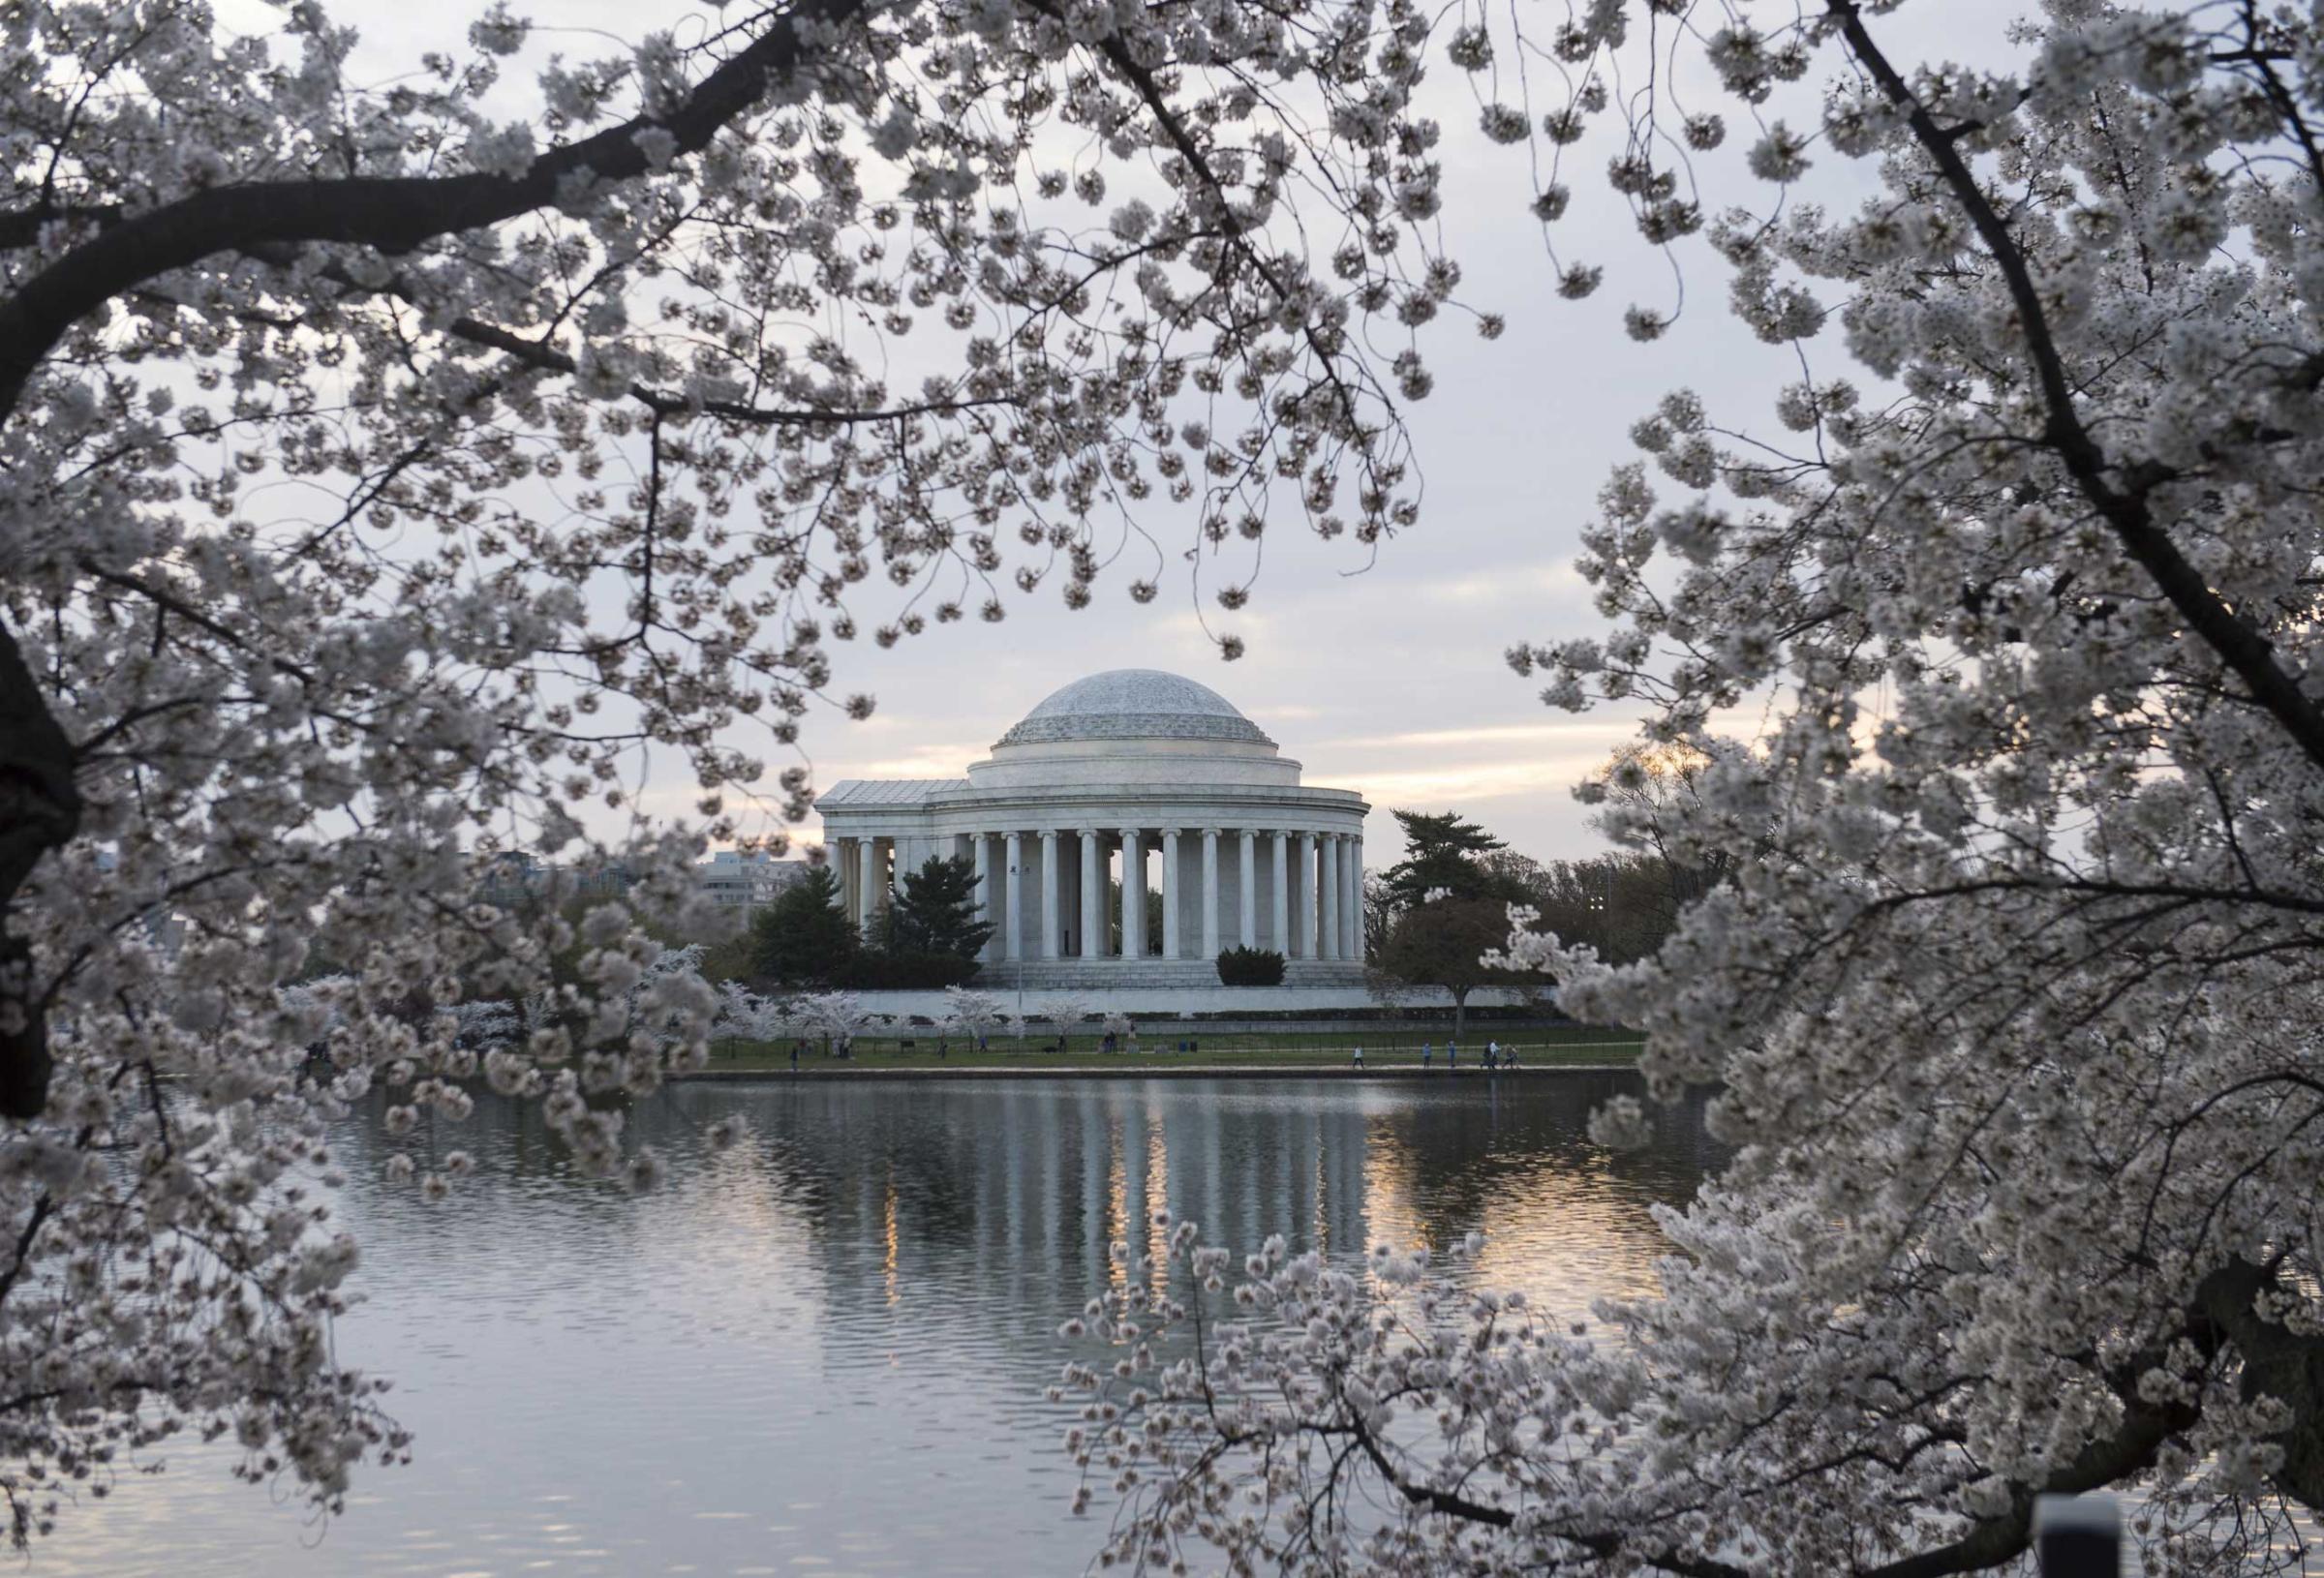 Cherry trees blossom around the Tidal Basin at sunrise near the Jefferson Memorial on the National Mall in Washington, DC, April 11, 2015.